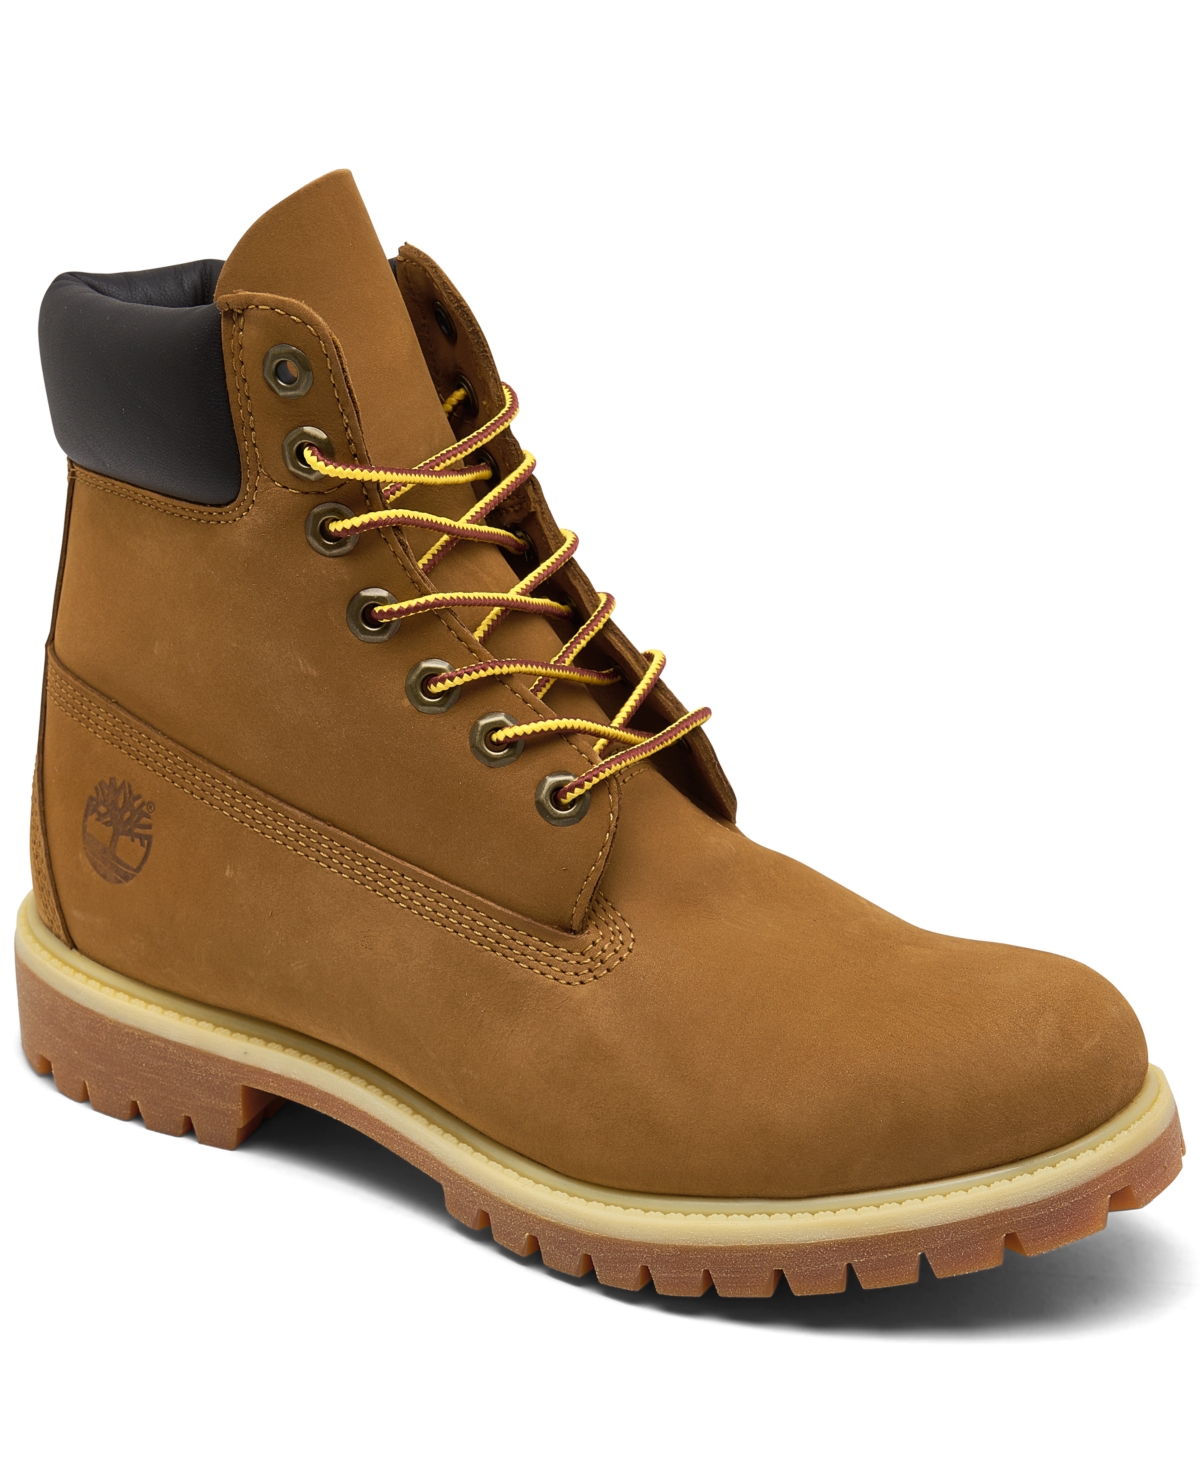 Timberland Men's 6" Premium Water-resistant Boots From Finish Line In Dark Wheat Nubuck